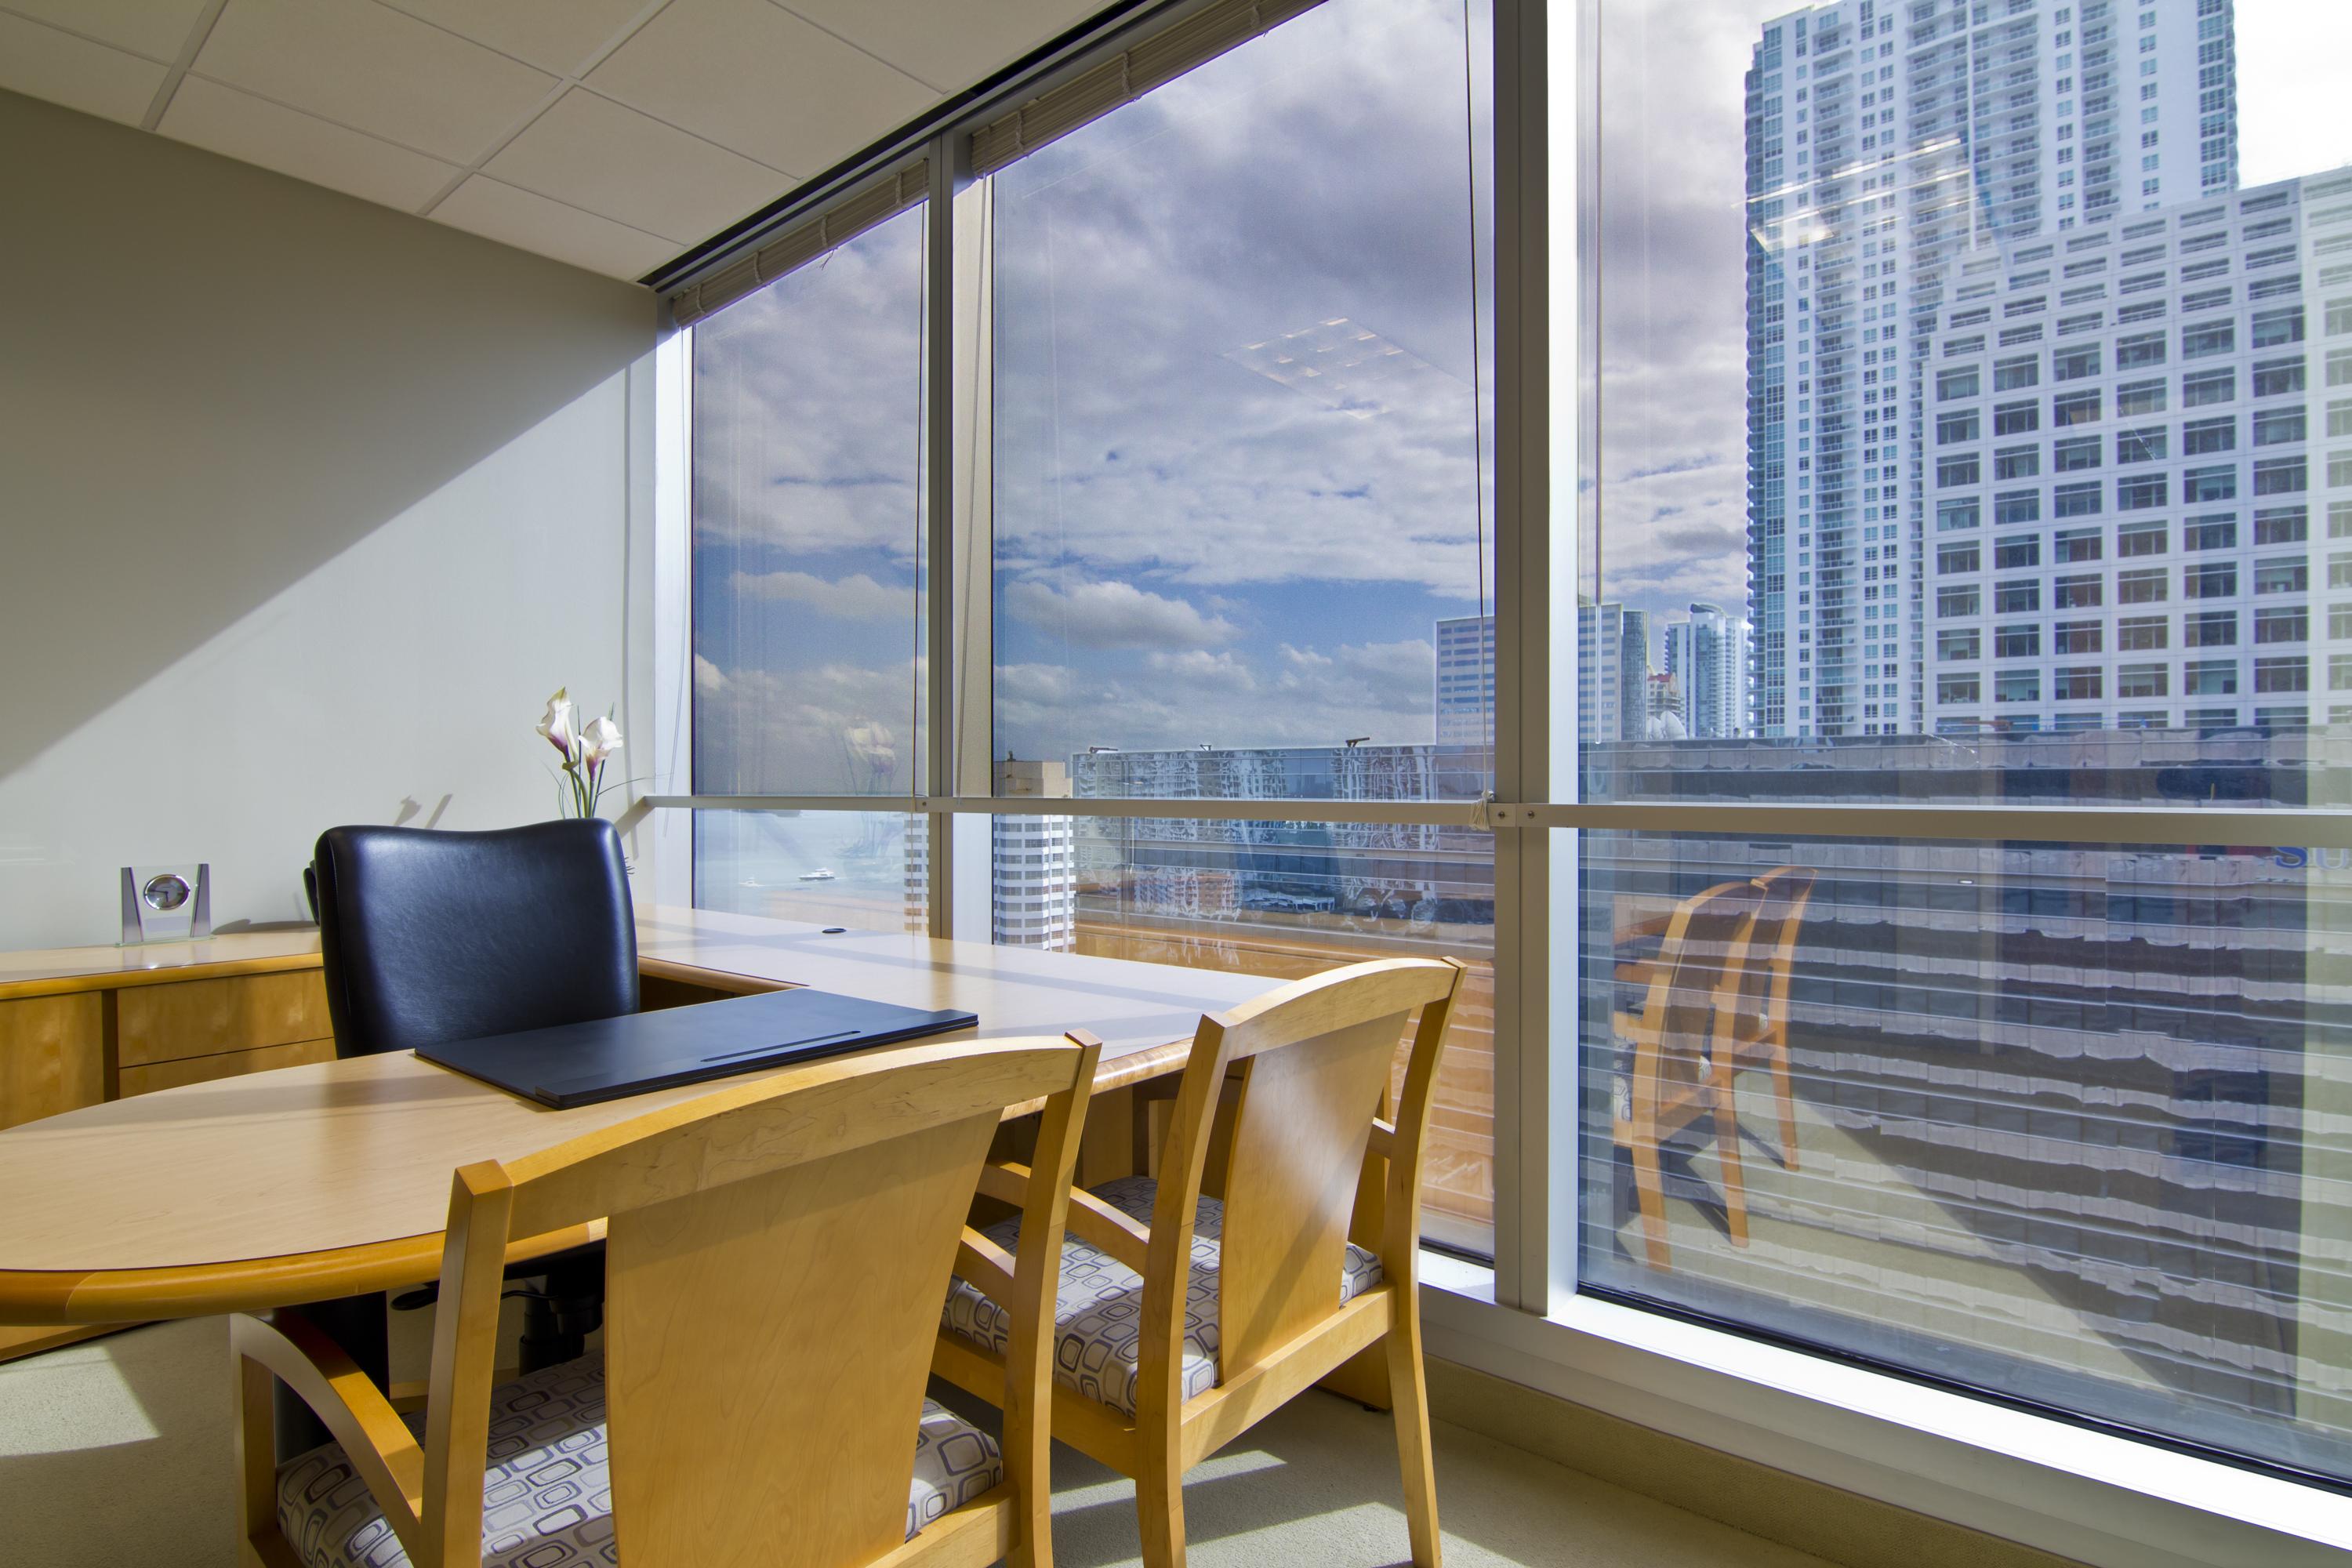 Miami Shared Office Space at 701 Brickell Avenue 33131